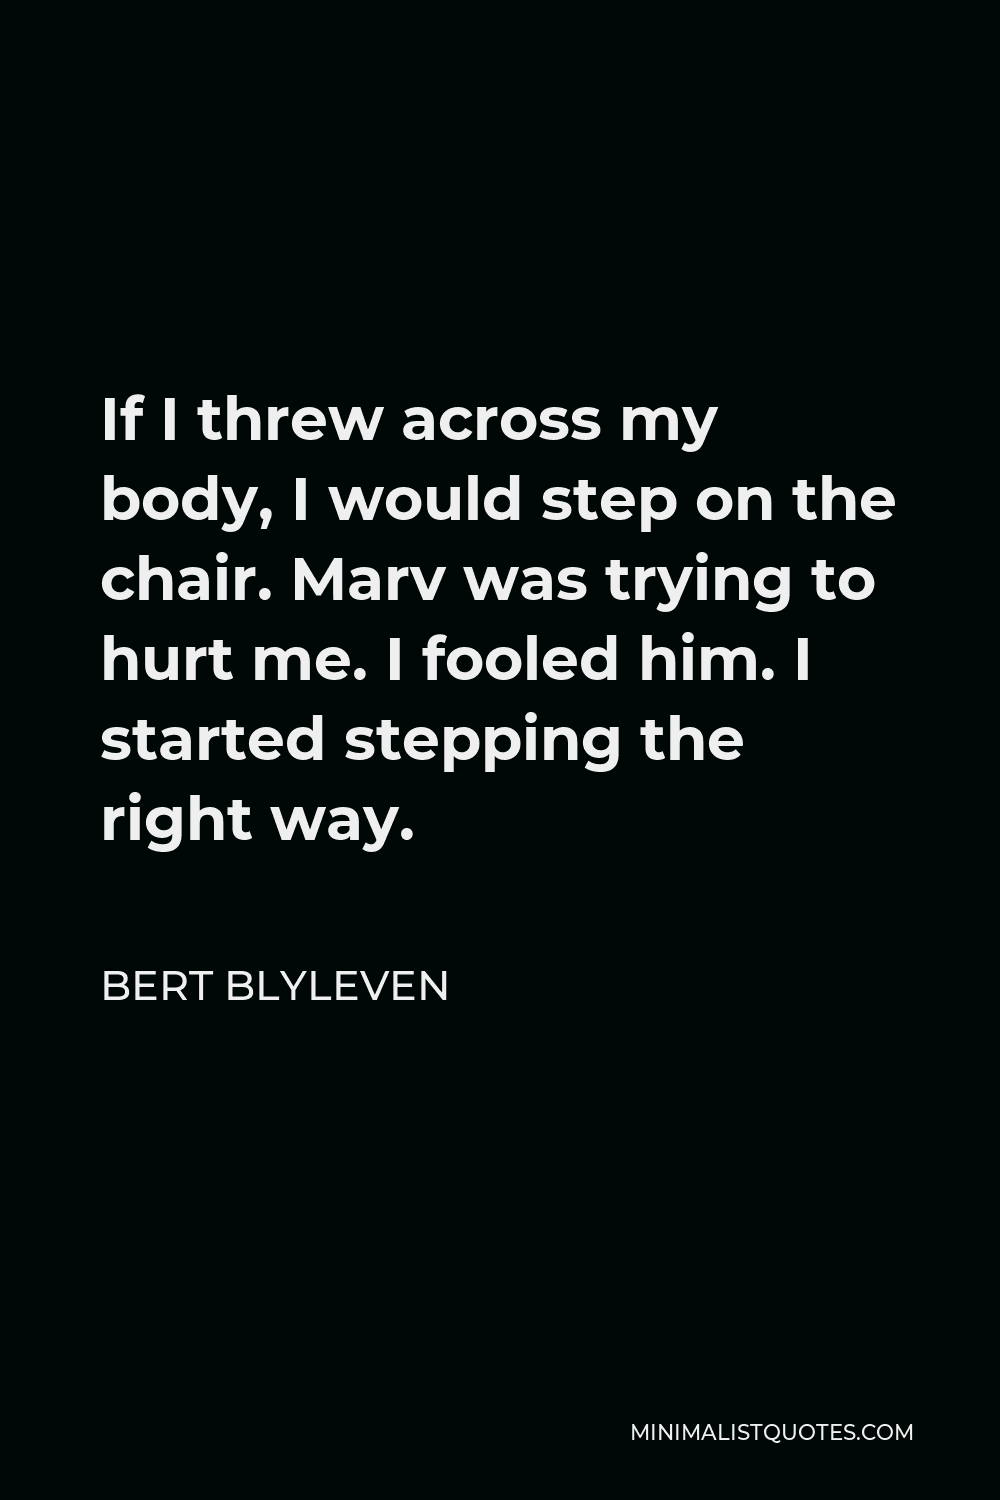 Bert Blyleven Quote - If I threw across my body, I would step on the chair. Marv was trying to hurt me. I fooled him. I started stepping the right way.